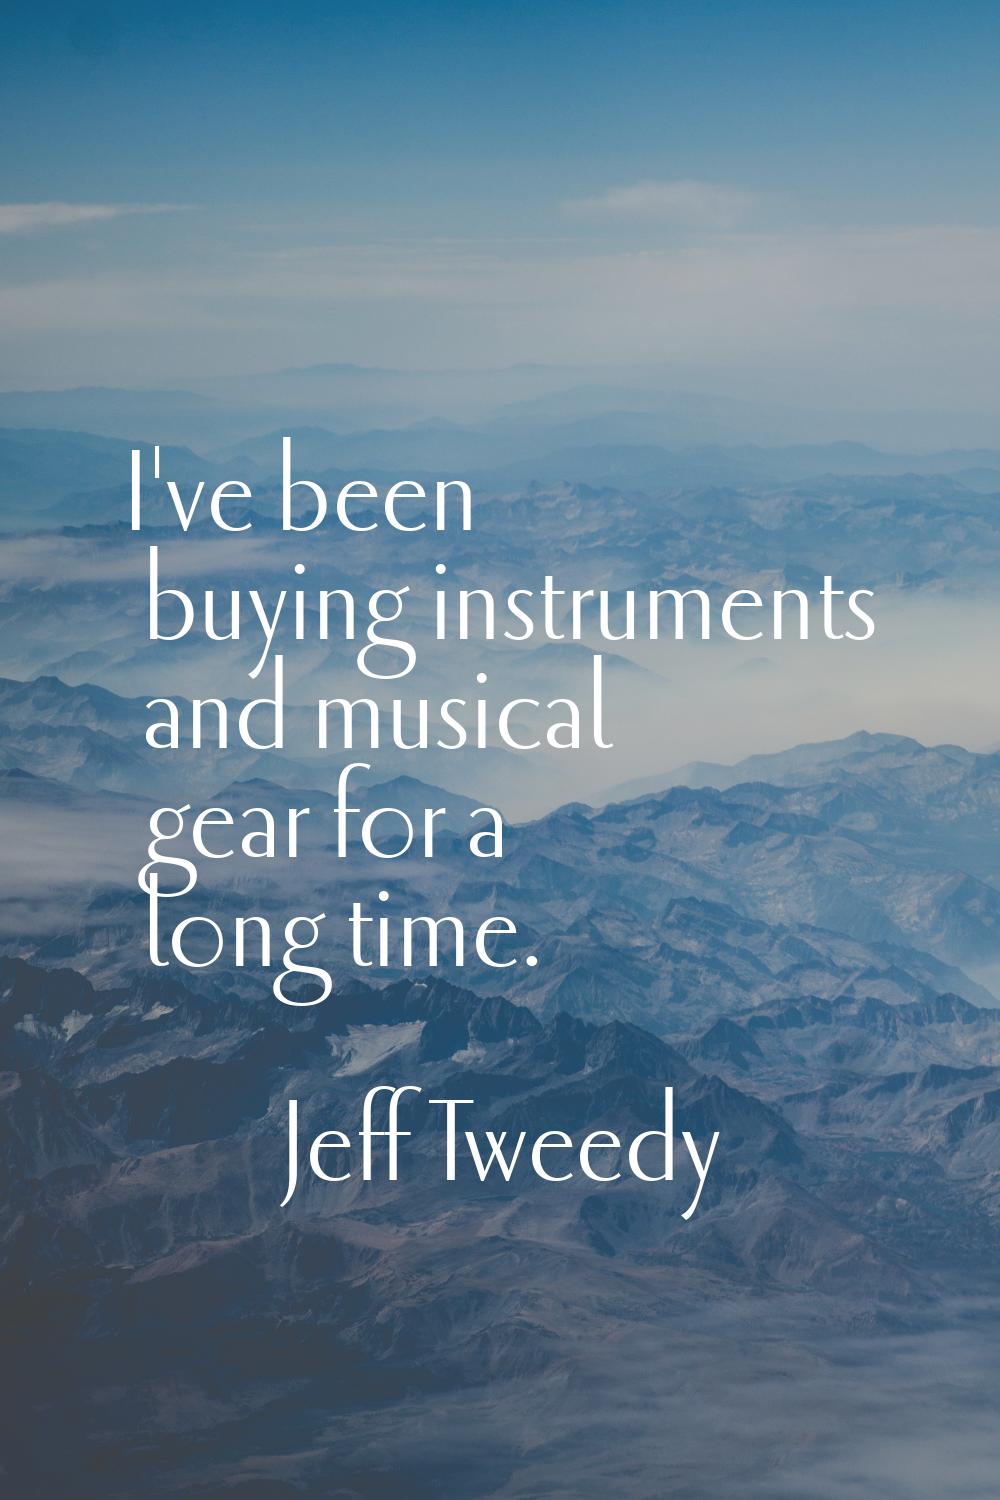 I've been buying instruments and musical gear for a long time.